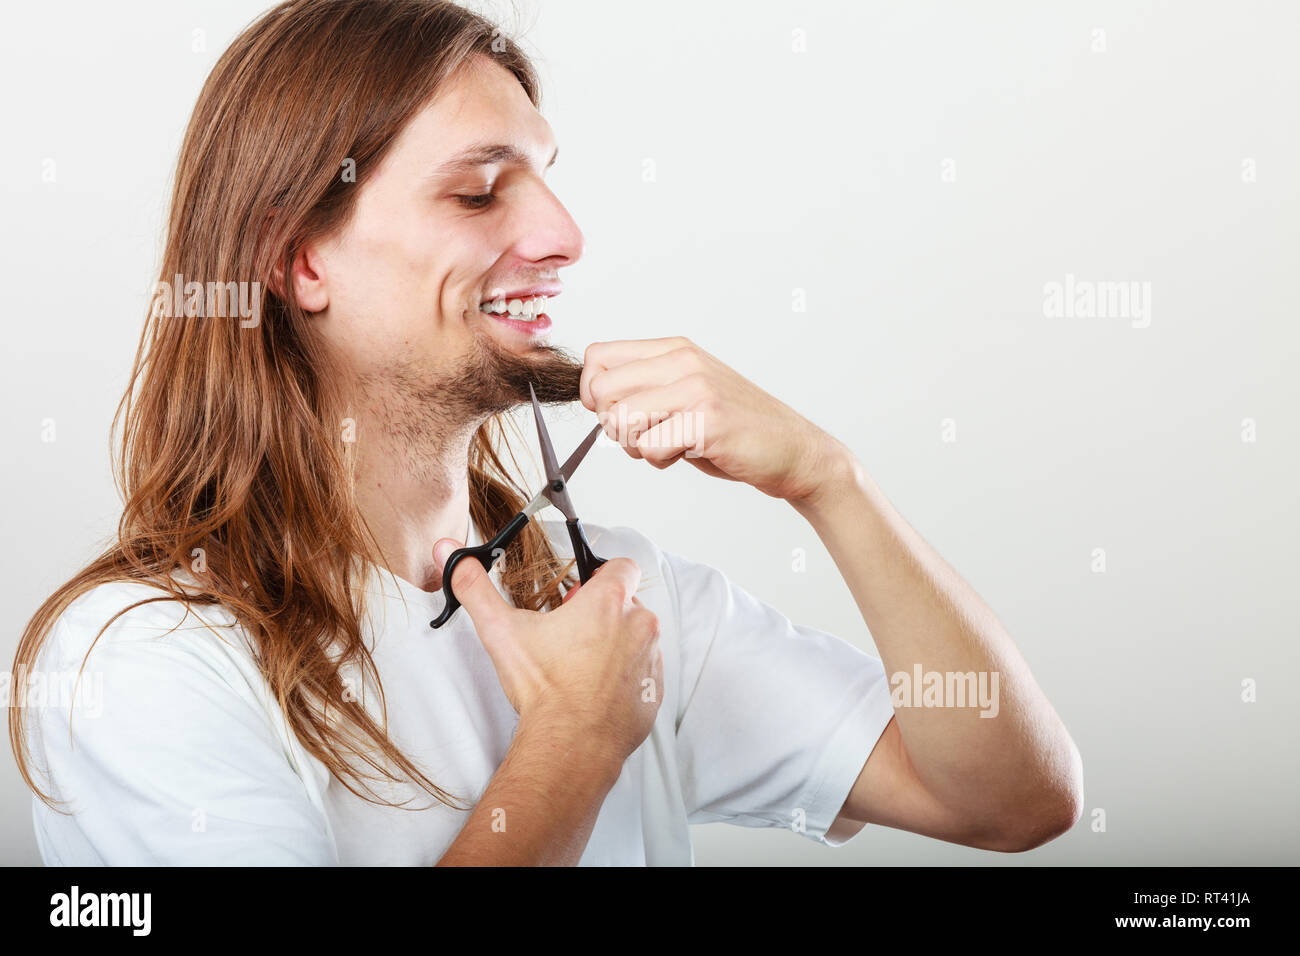 Cut And Shave Concept Young Man With Long Beard Holding Scissors